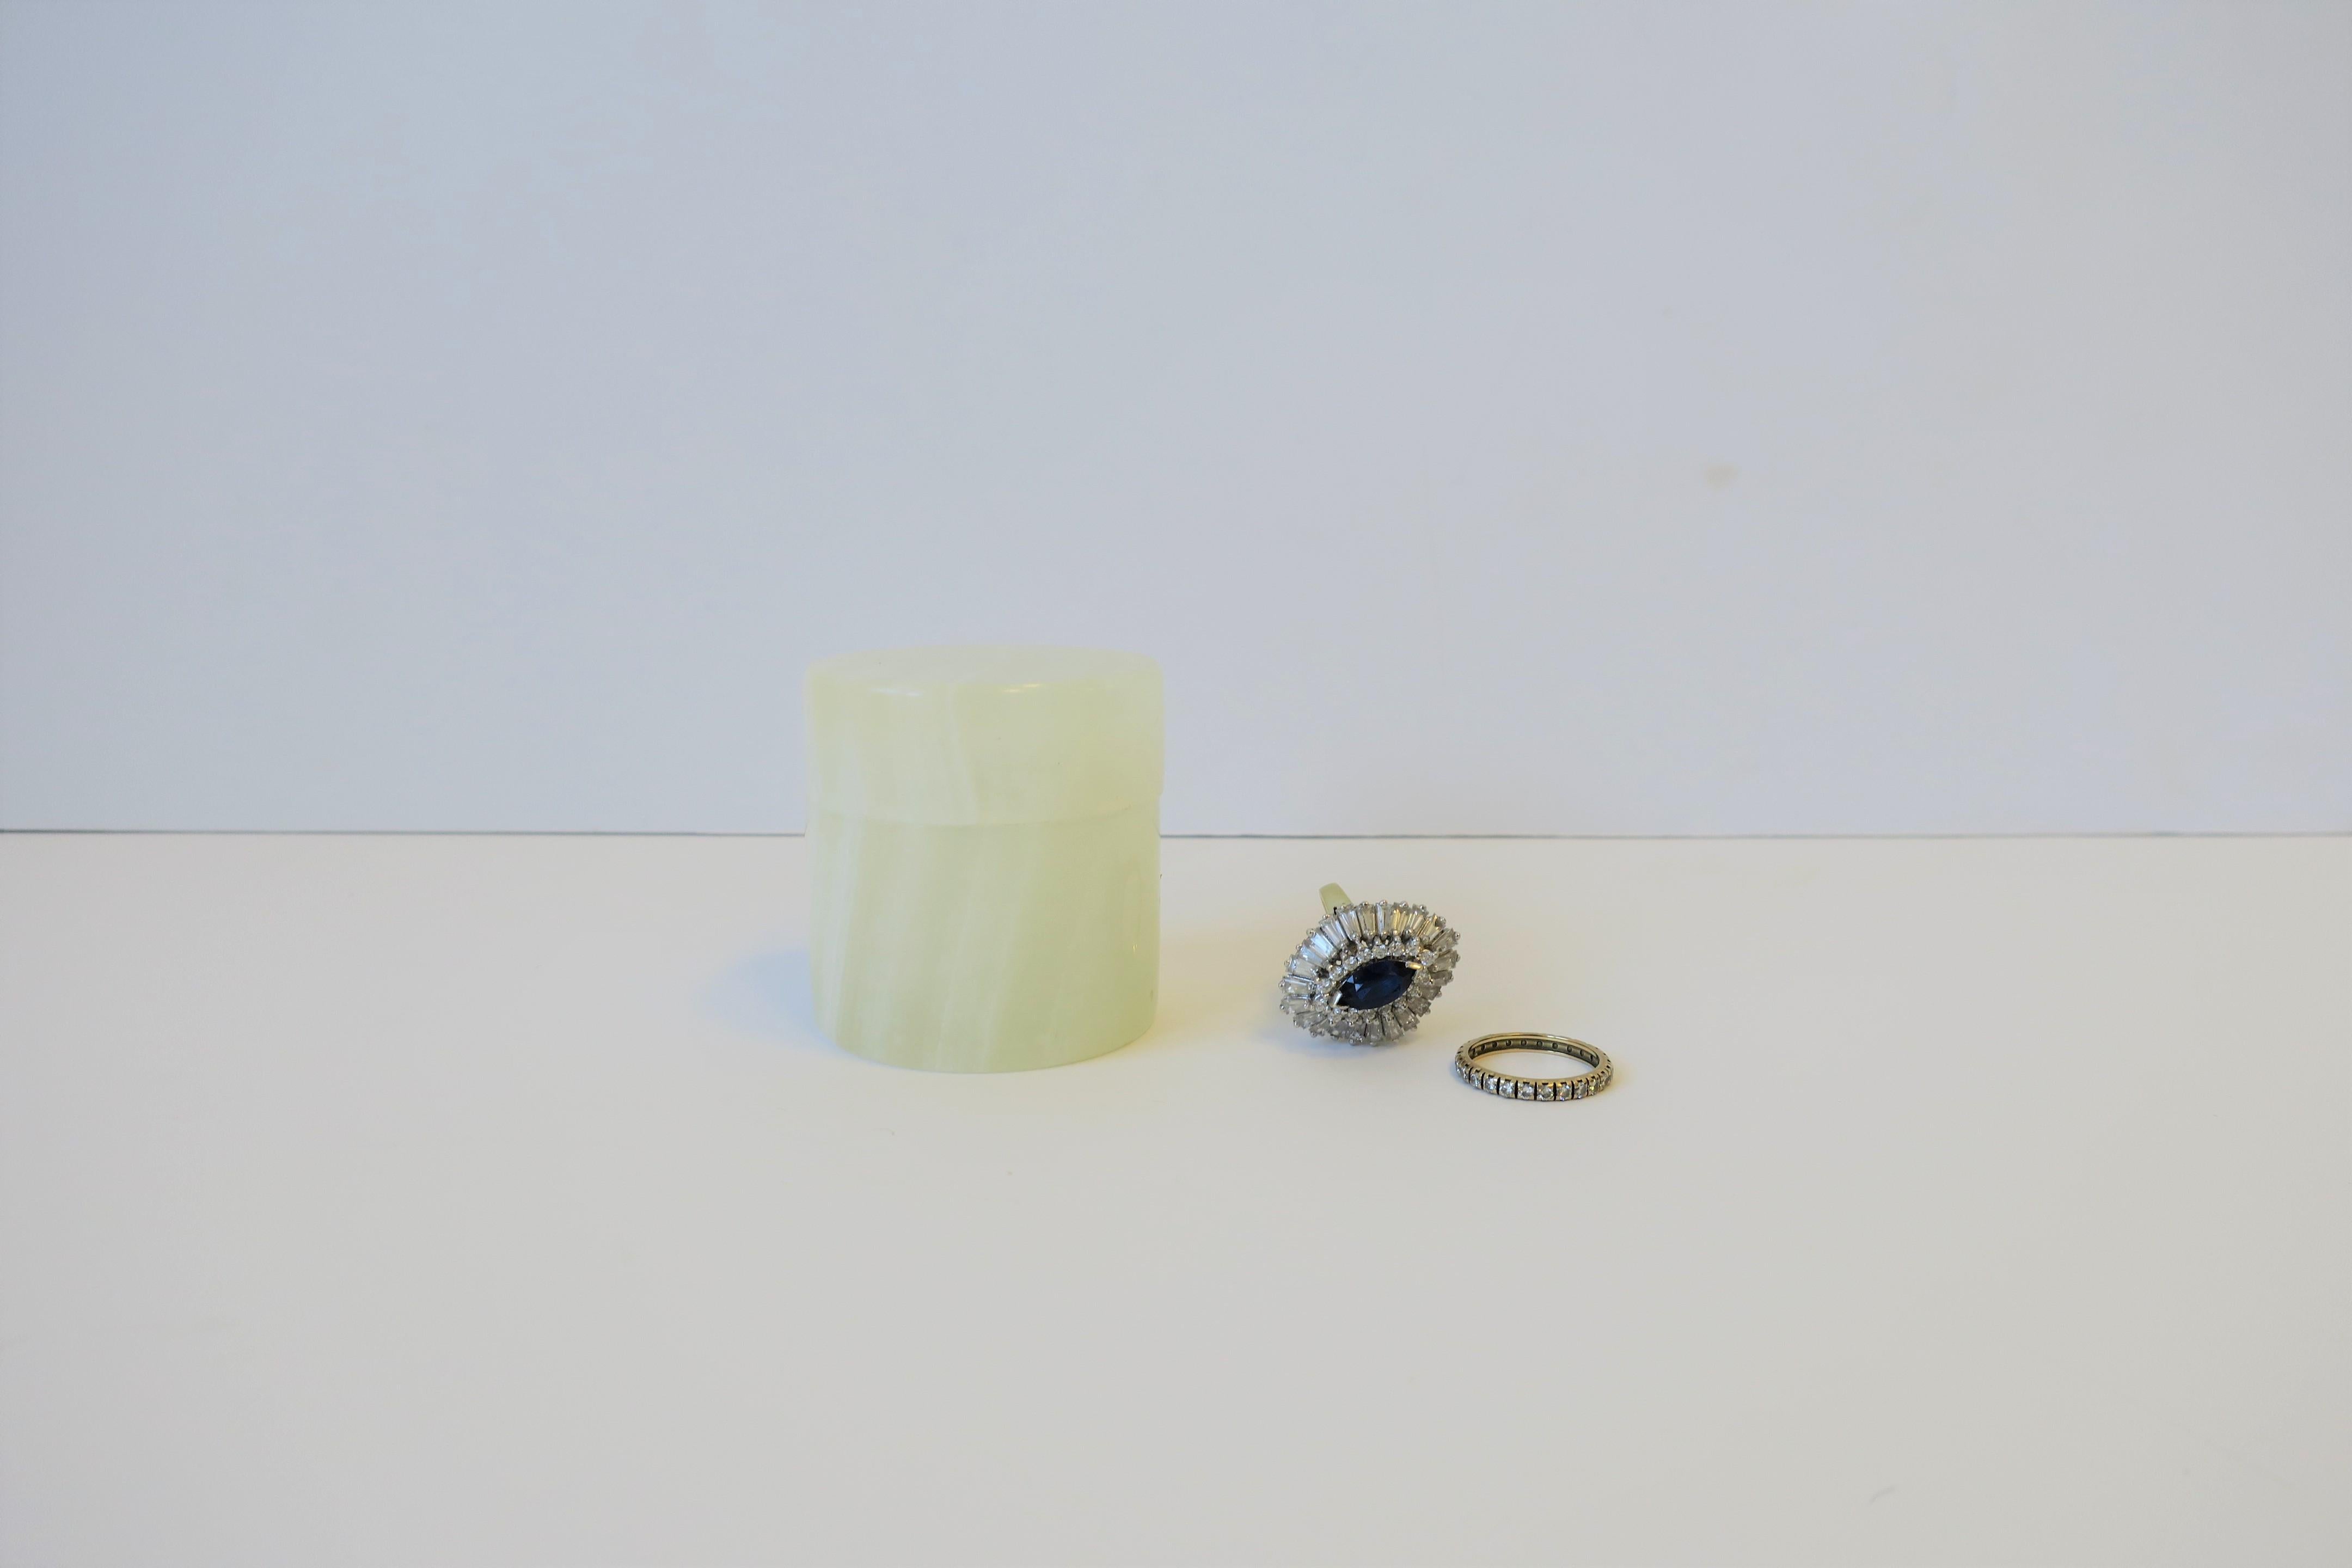 A small 1970s Italian Modern white onyx marble round box. A great piece to hold small items on a desk or vanity area for paperclips or jewelry, such as rings earrings, earring, or cufflinks. 

Piece measures: 2